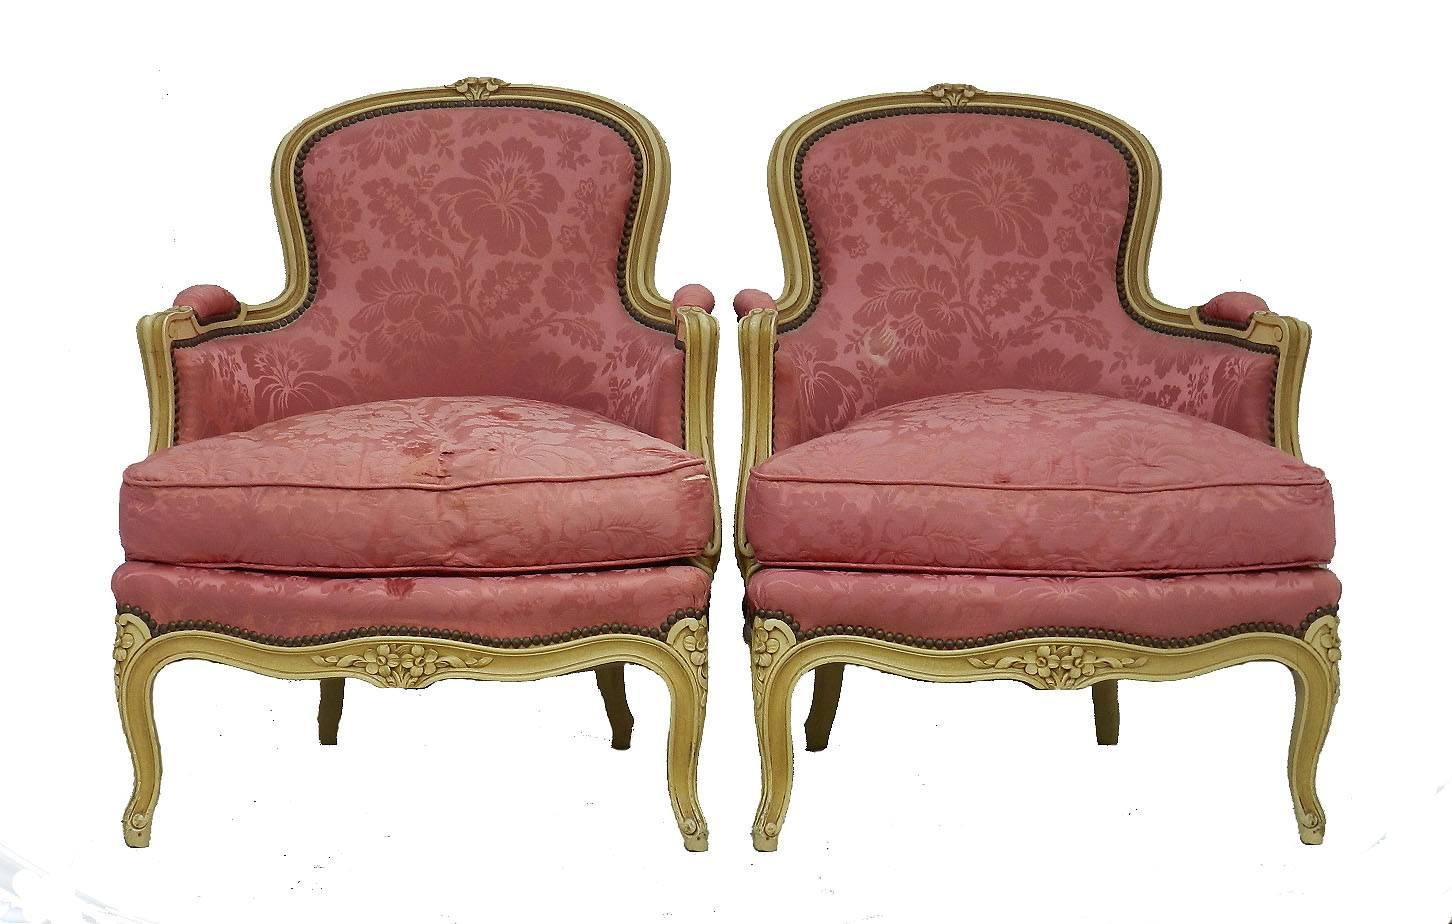 Pair Bergere Armchairs Louis XV revival French early 20th century  to recover
Upholstered with original feather cushions
Original craquelure finish
Upholstery is sound 
The original silk covers are shredding and the cushion covers are deteriorating